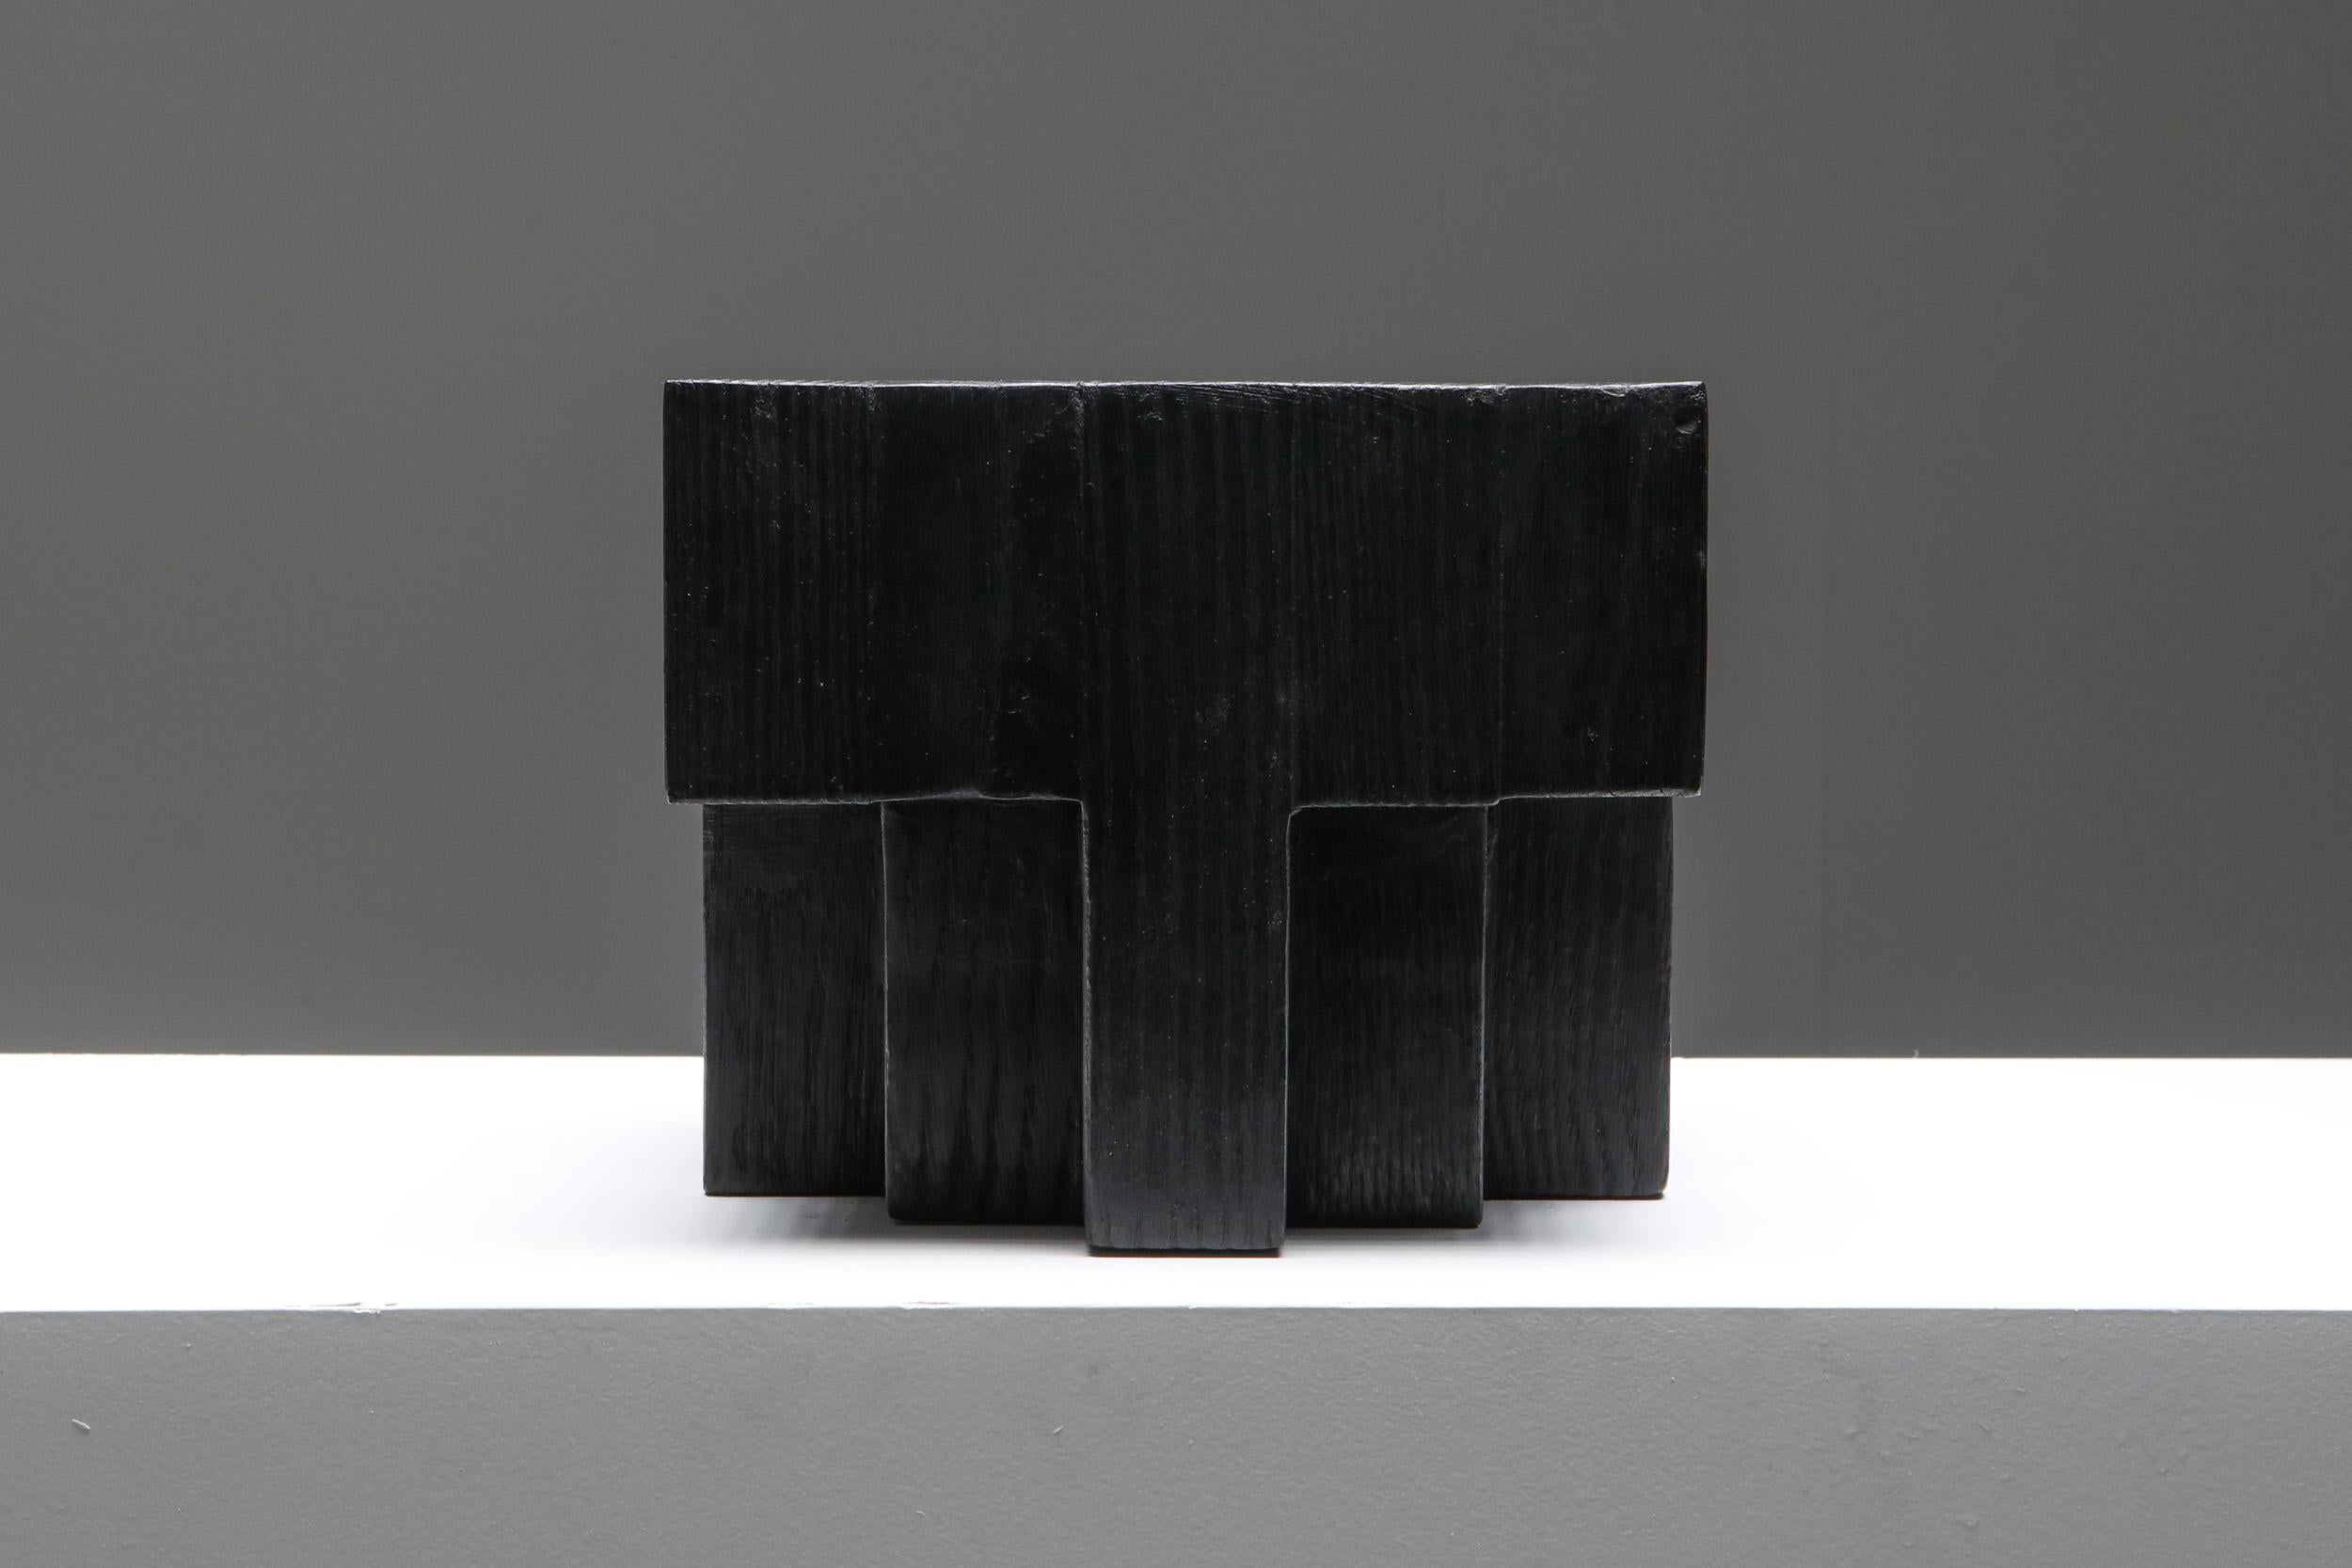 Arno Declercq; Belgian Design; Handcrafted

Made in burned and waxed Iroko wood and burned steel.
small 13 cm wide x 13 cm deep x 14 cm high / 5” wide x 5” deep x 15,5” high
Large 21 cm wide x 21 cm deep x 18 cm high / 8,2” wide x 8,2” deep x 7”